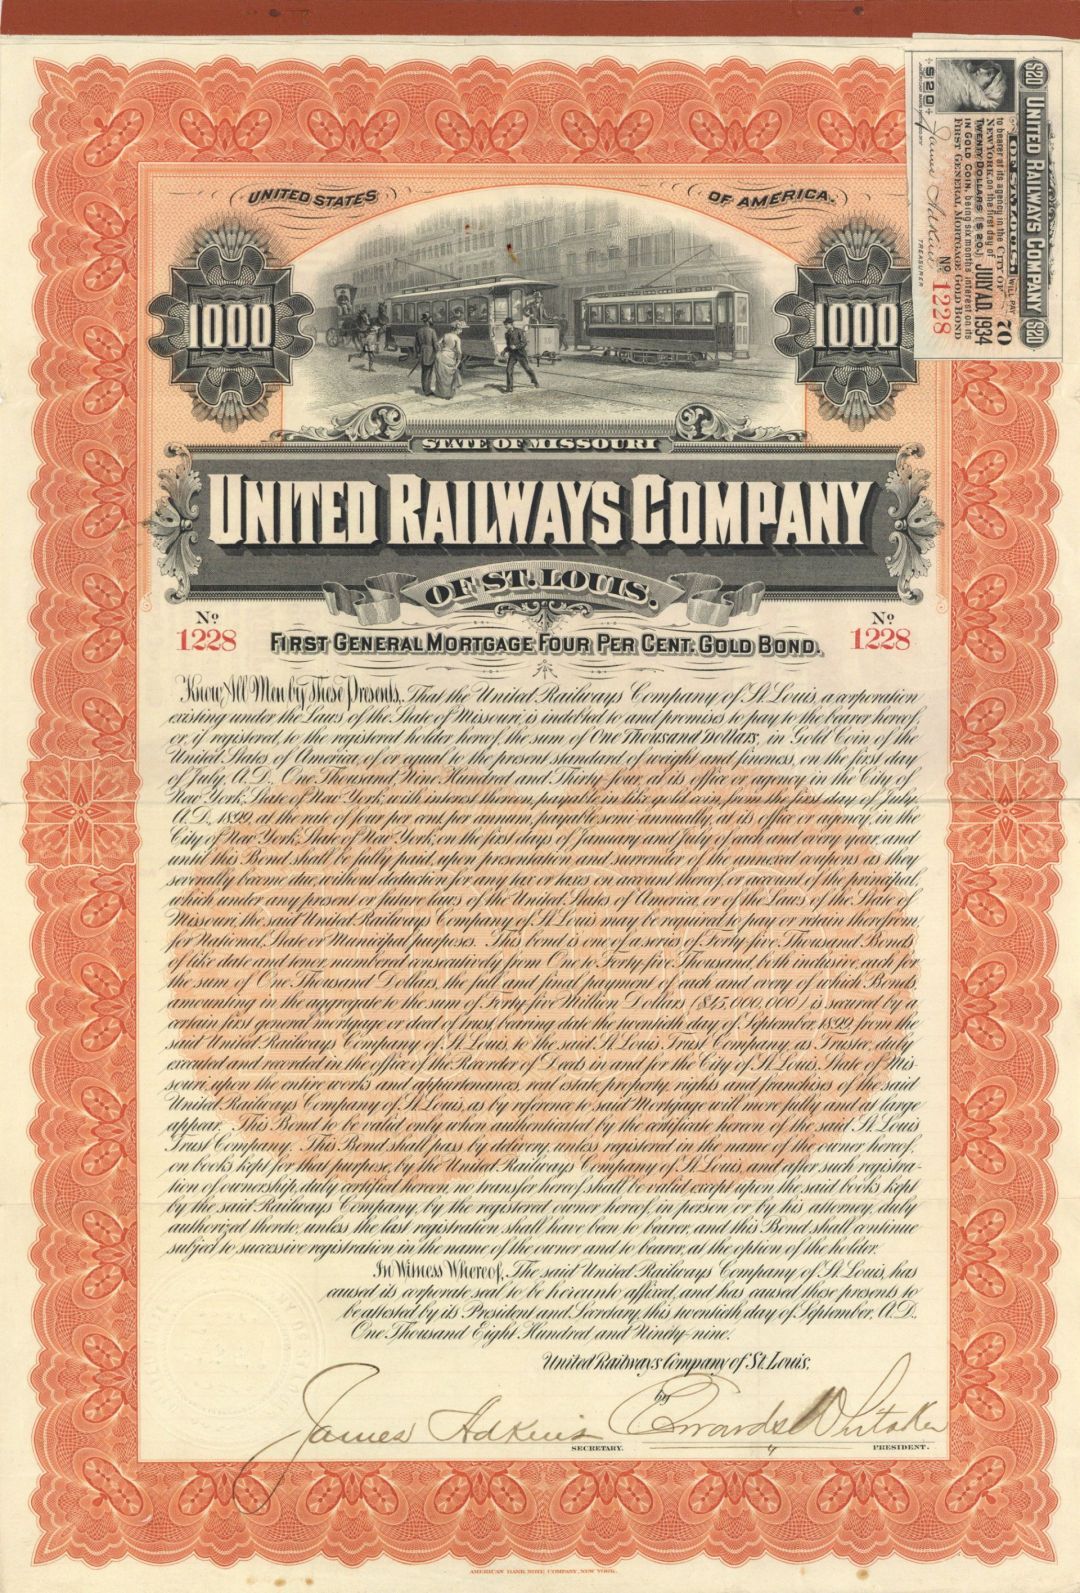 United Railways Co. of St. Louis - 1899 dated $1,000 Railroad Gold Bond